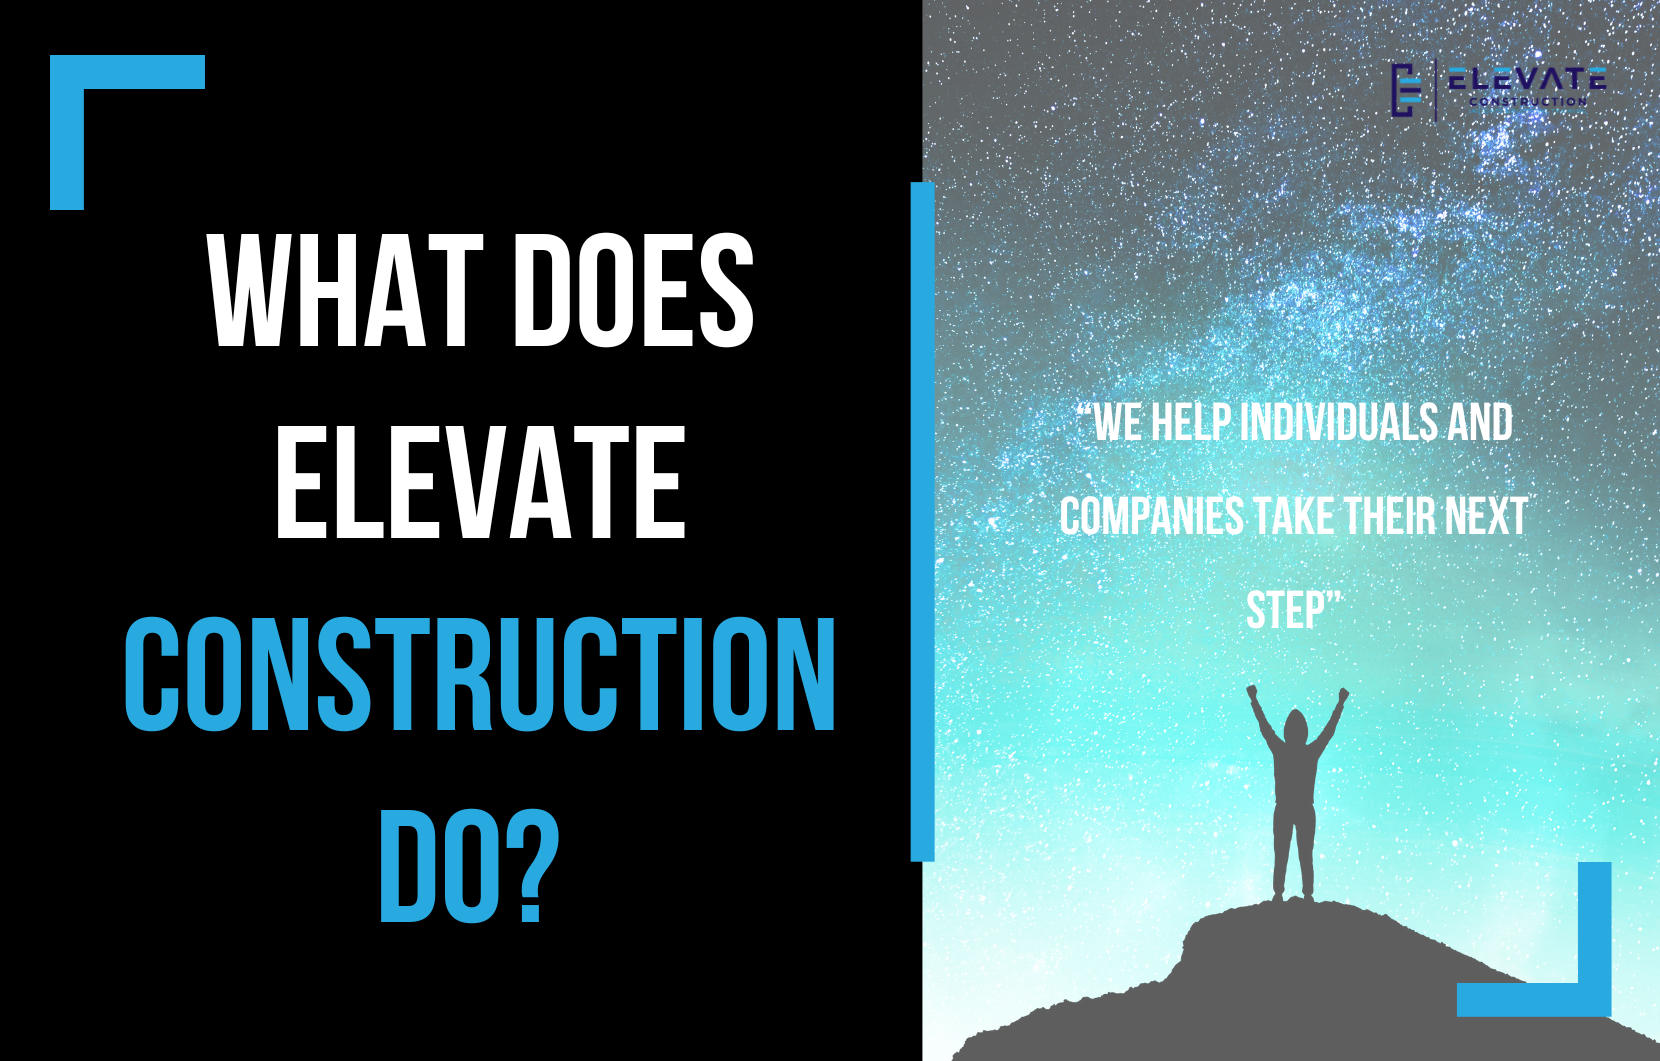 What does Elevate Construction do?